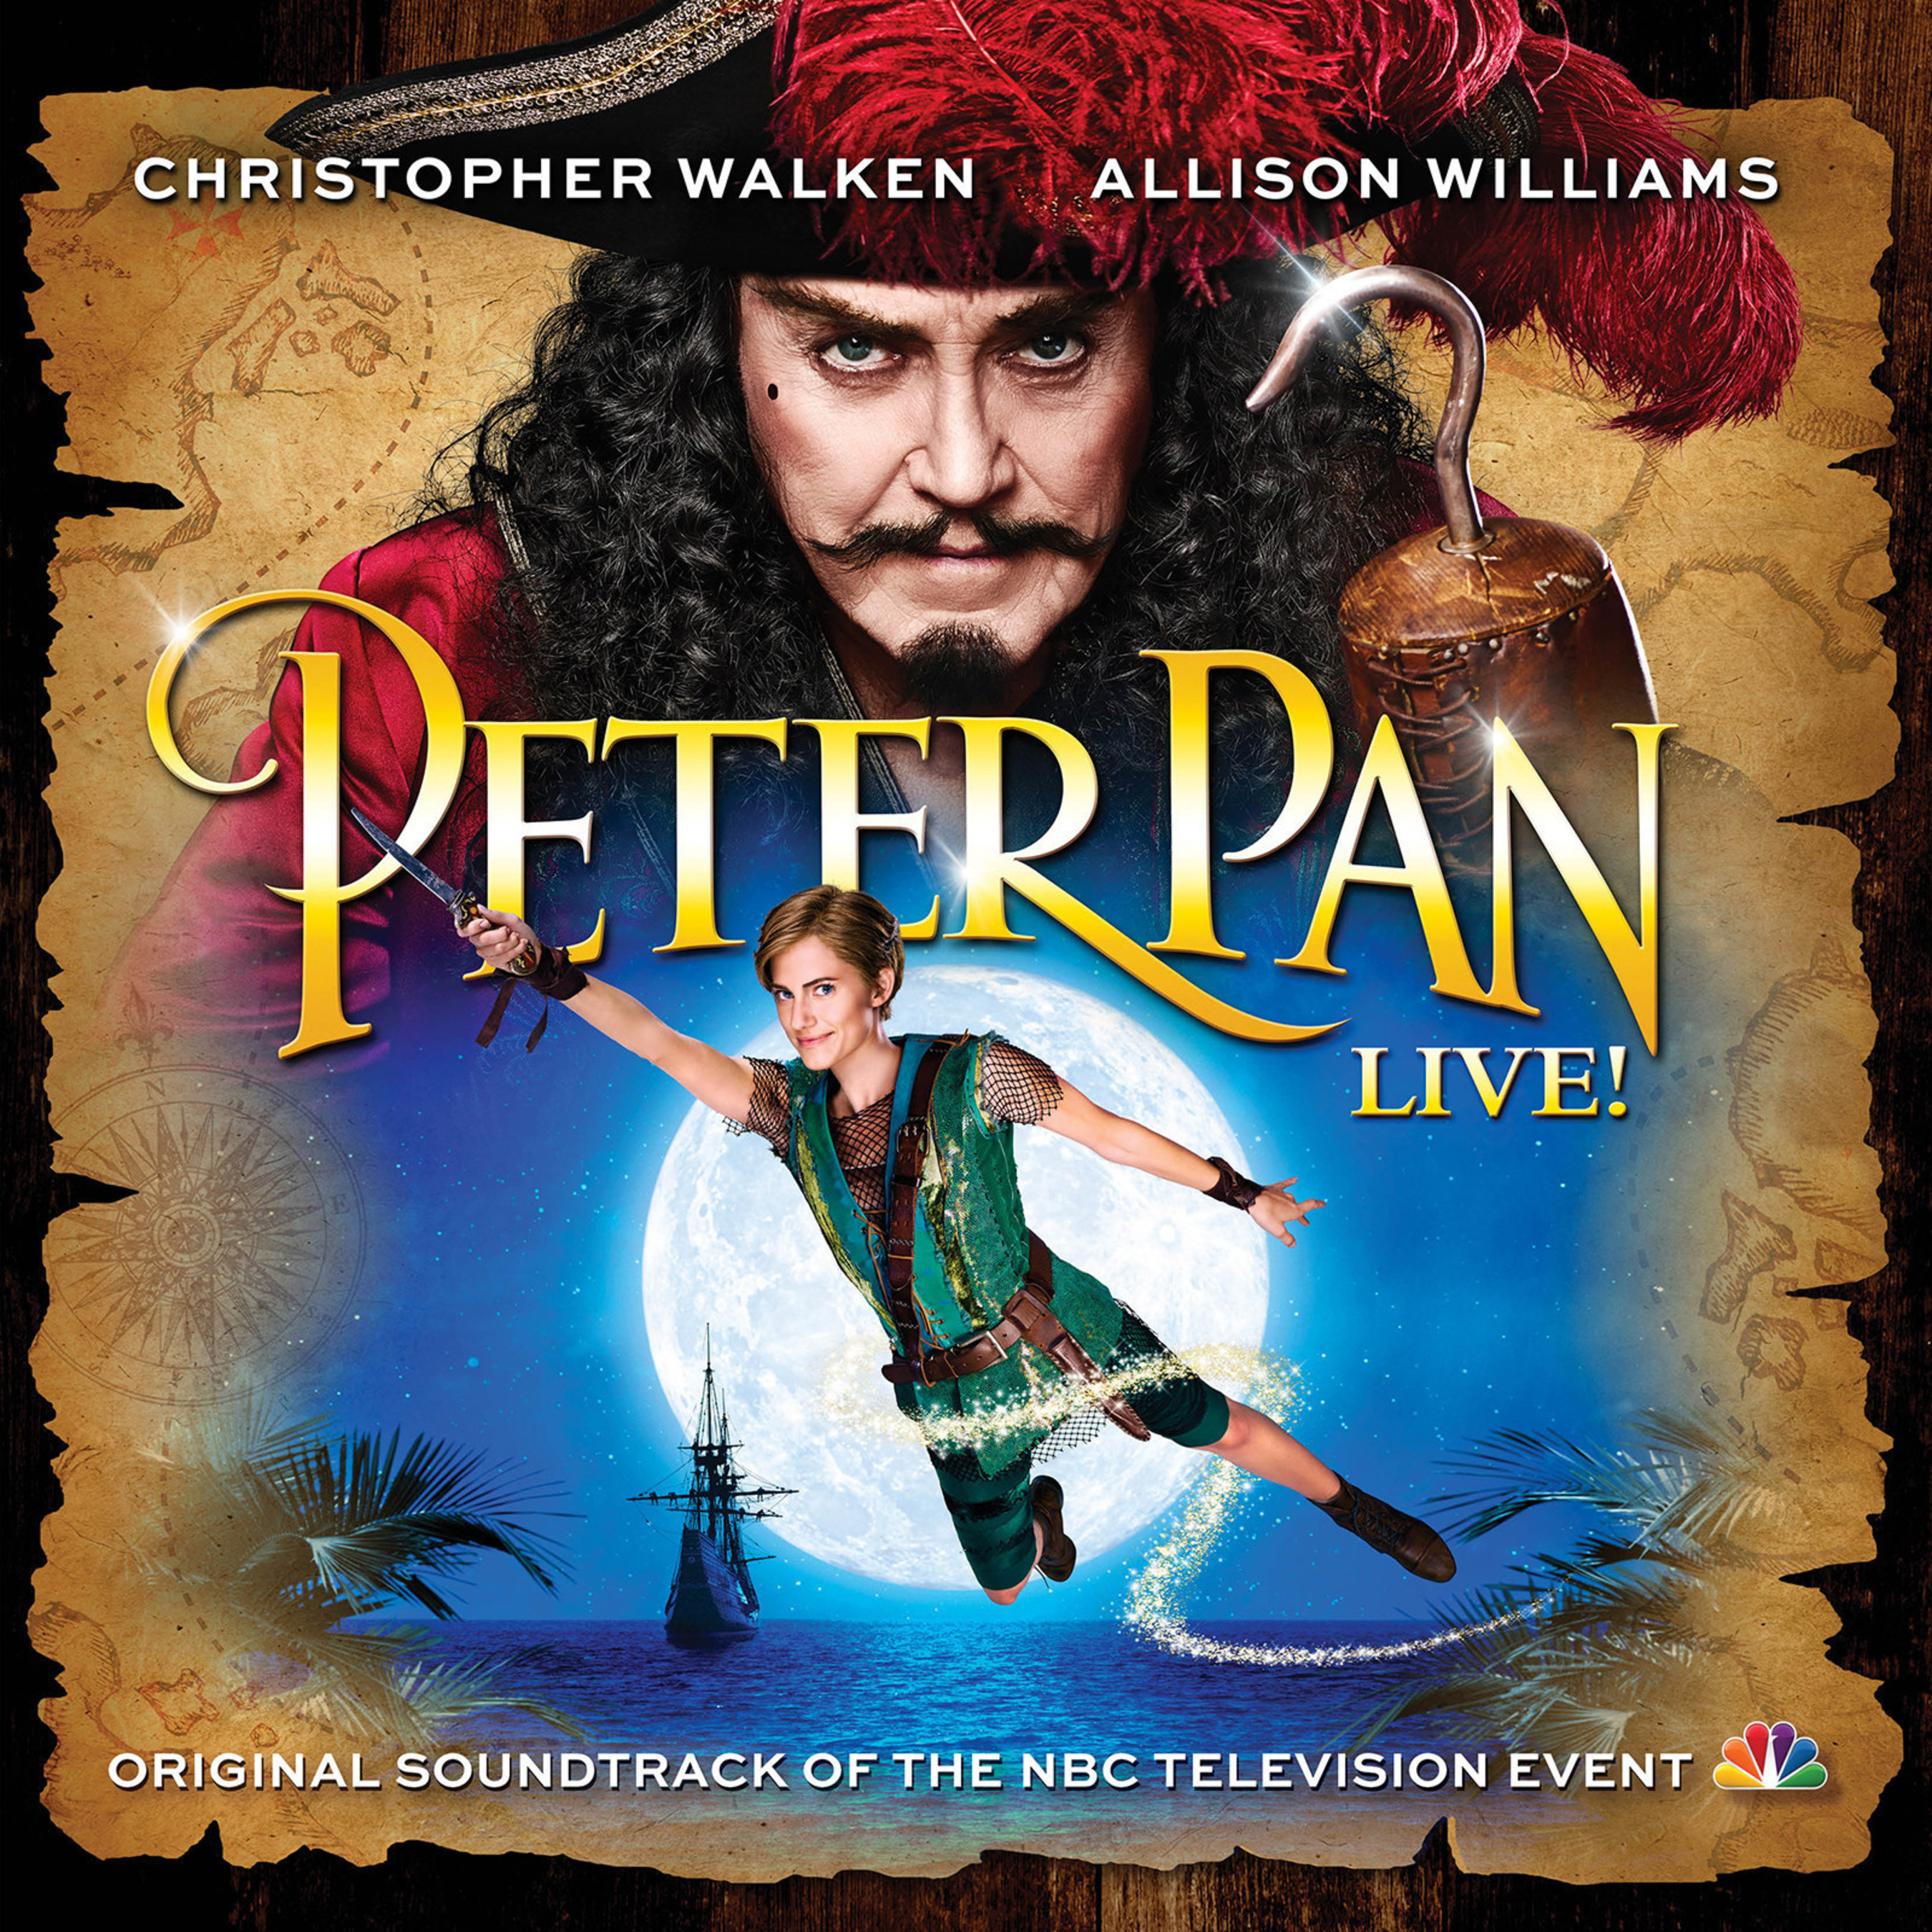 Pre-order the Peter Pan Live! Soundtrack today at www.broadwayrecords.com